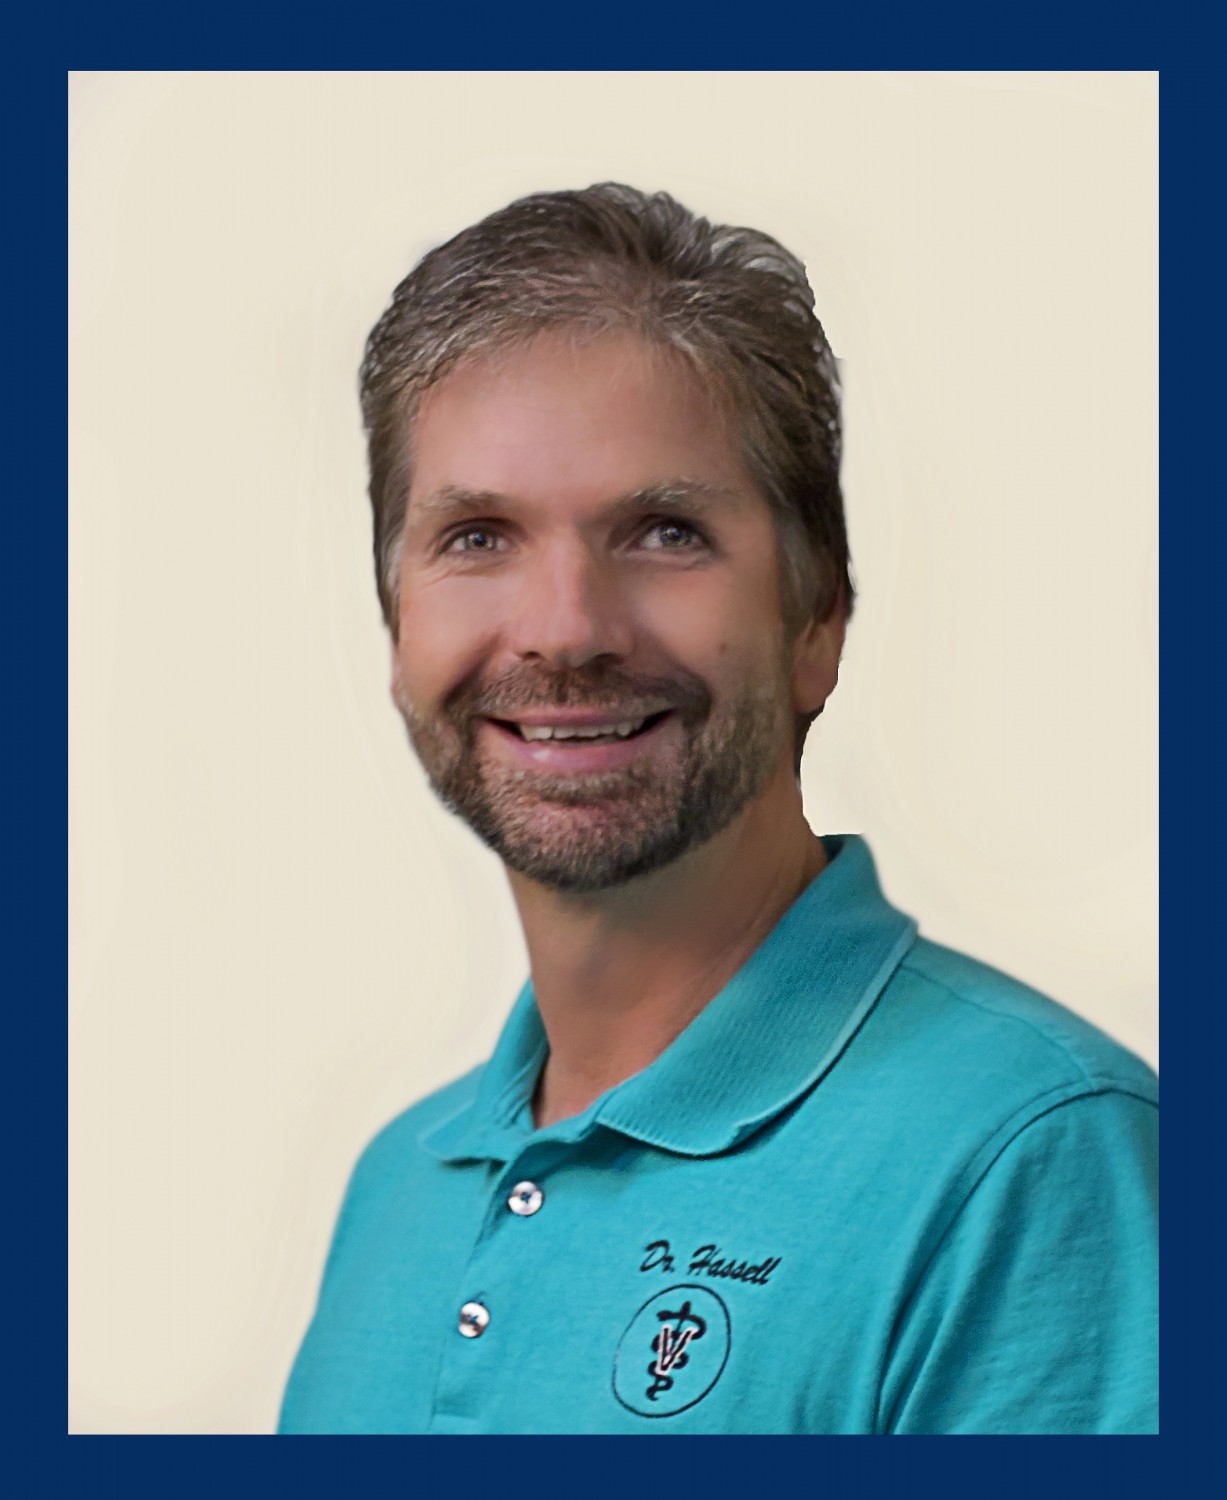 Dr. Hassel, DVM welcomes you and your pet to Westlake Animal Hospital!